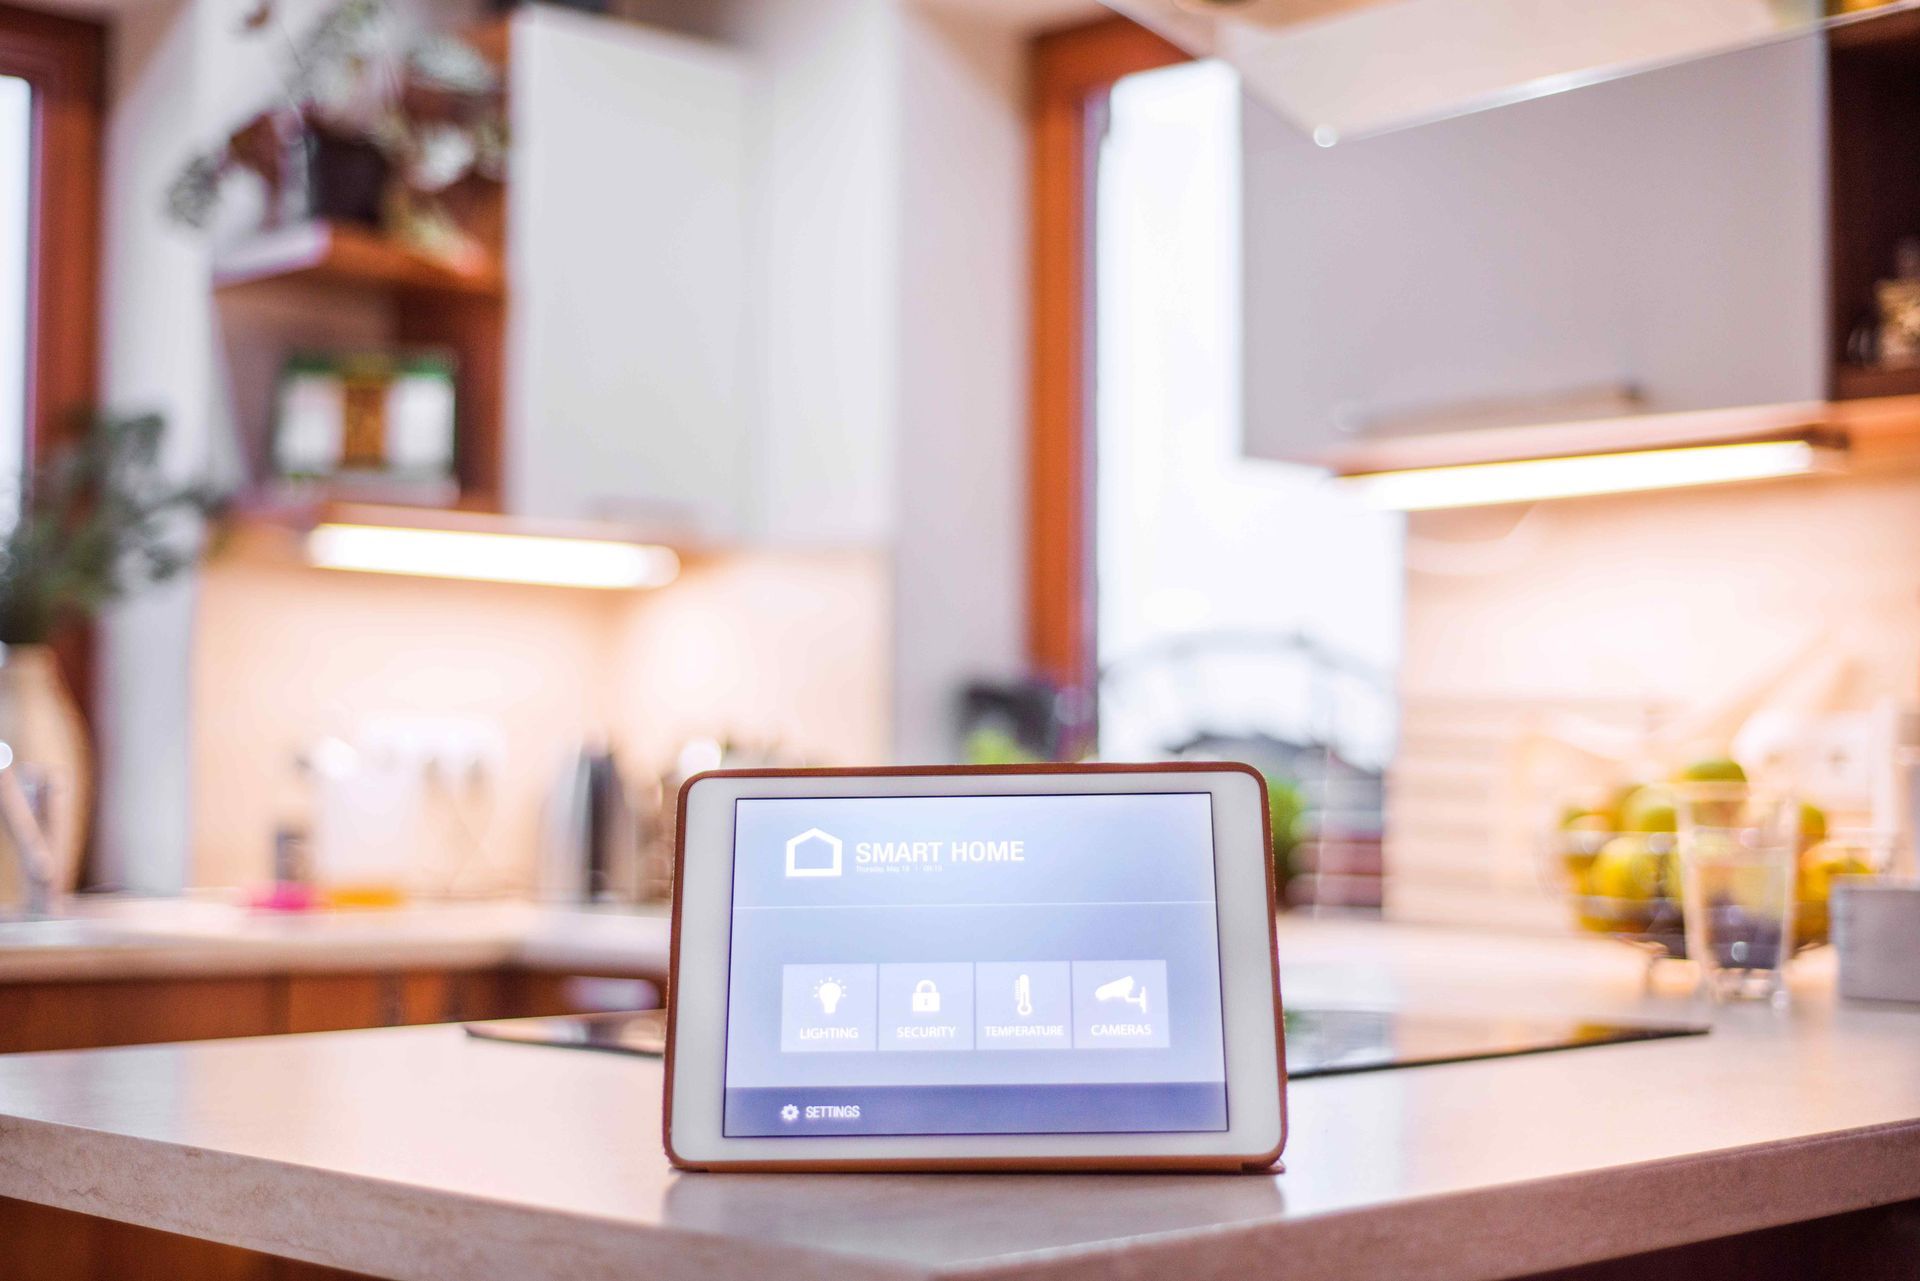 Smart Home Controlled By Tablet In Kitchen